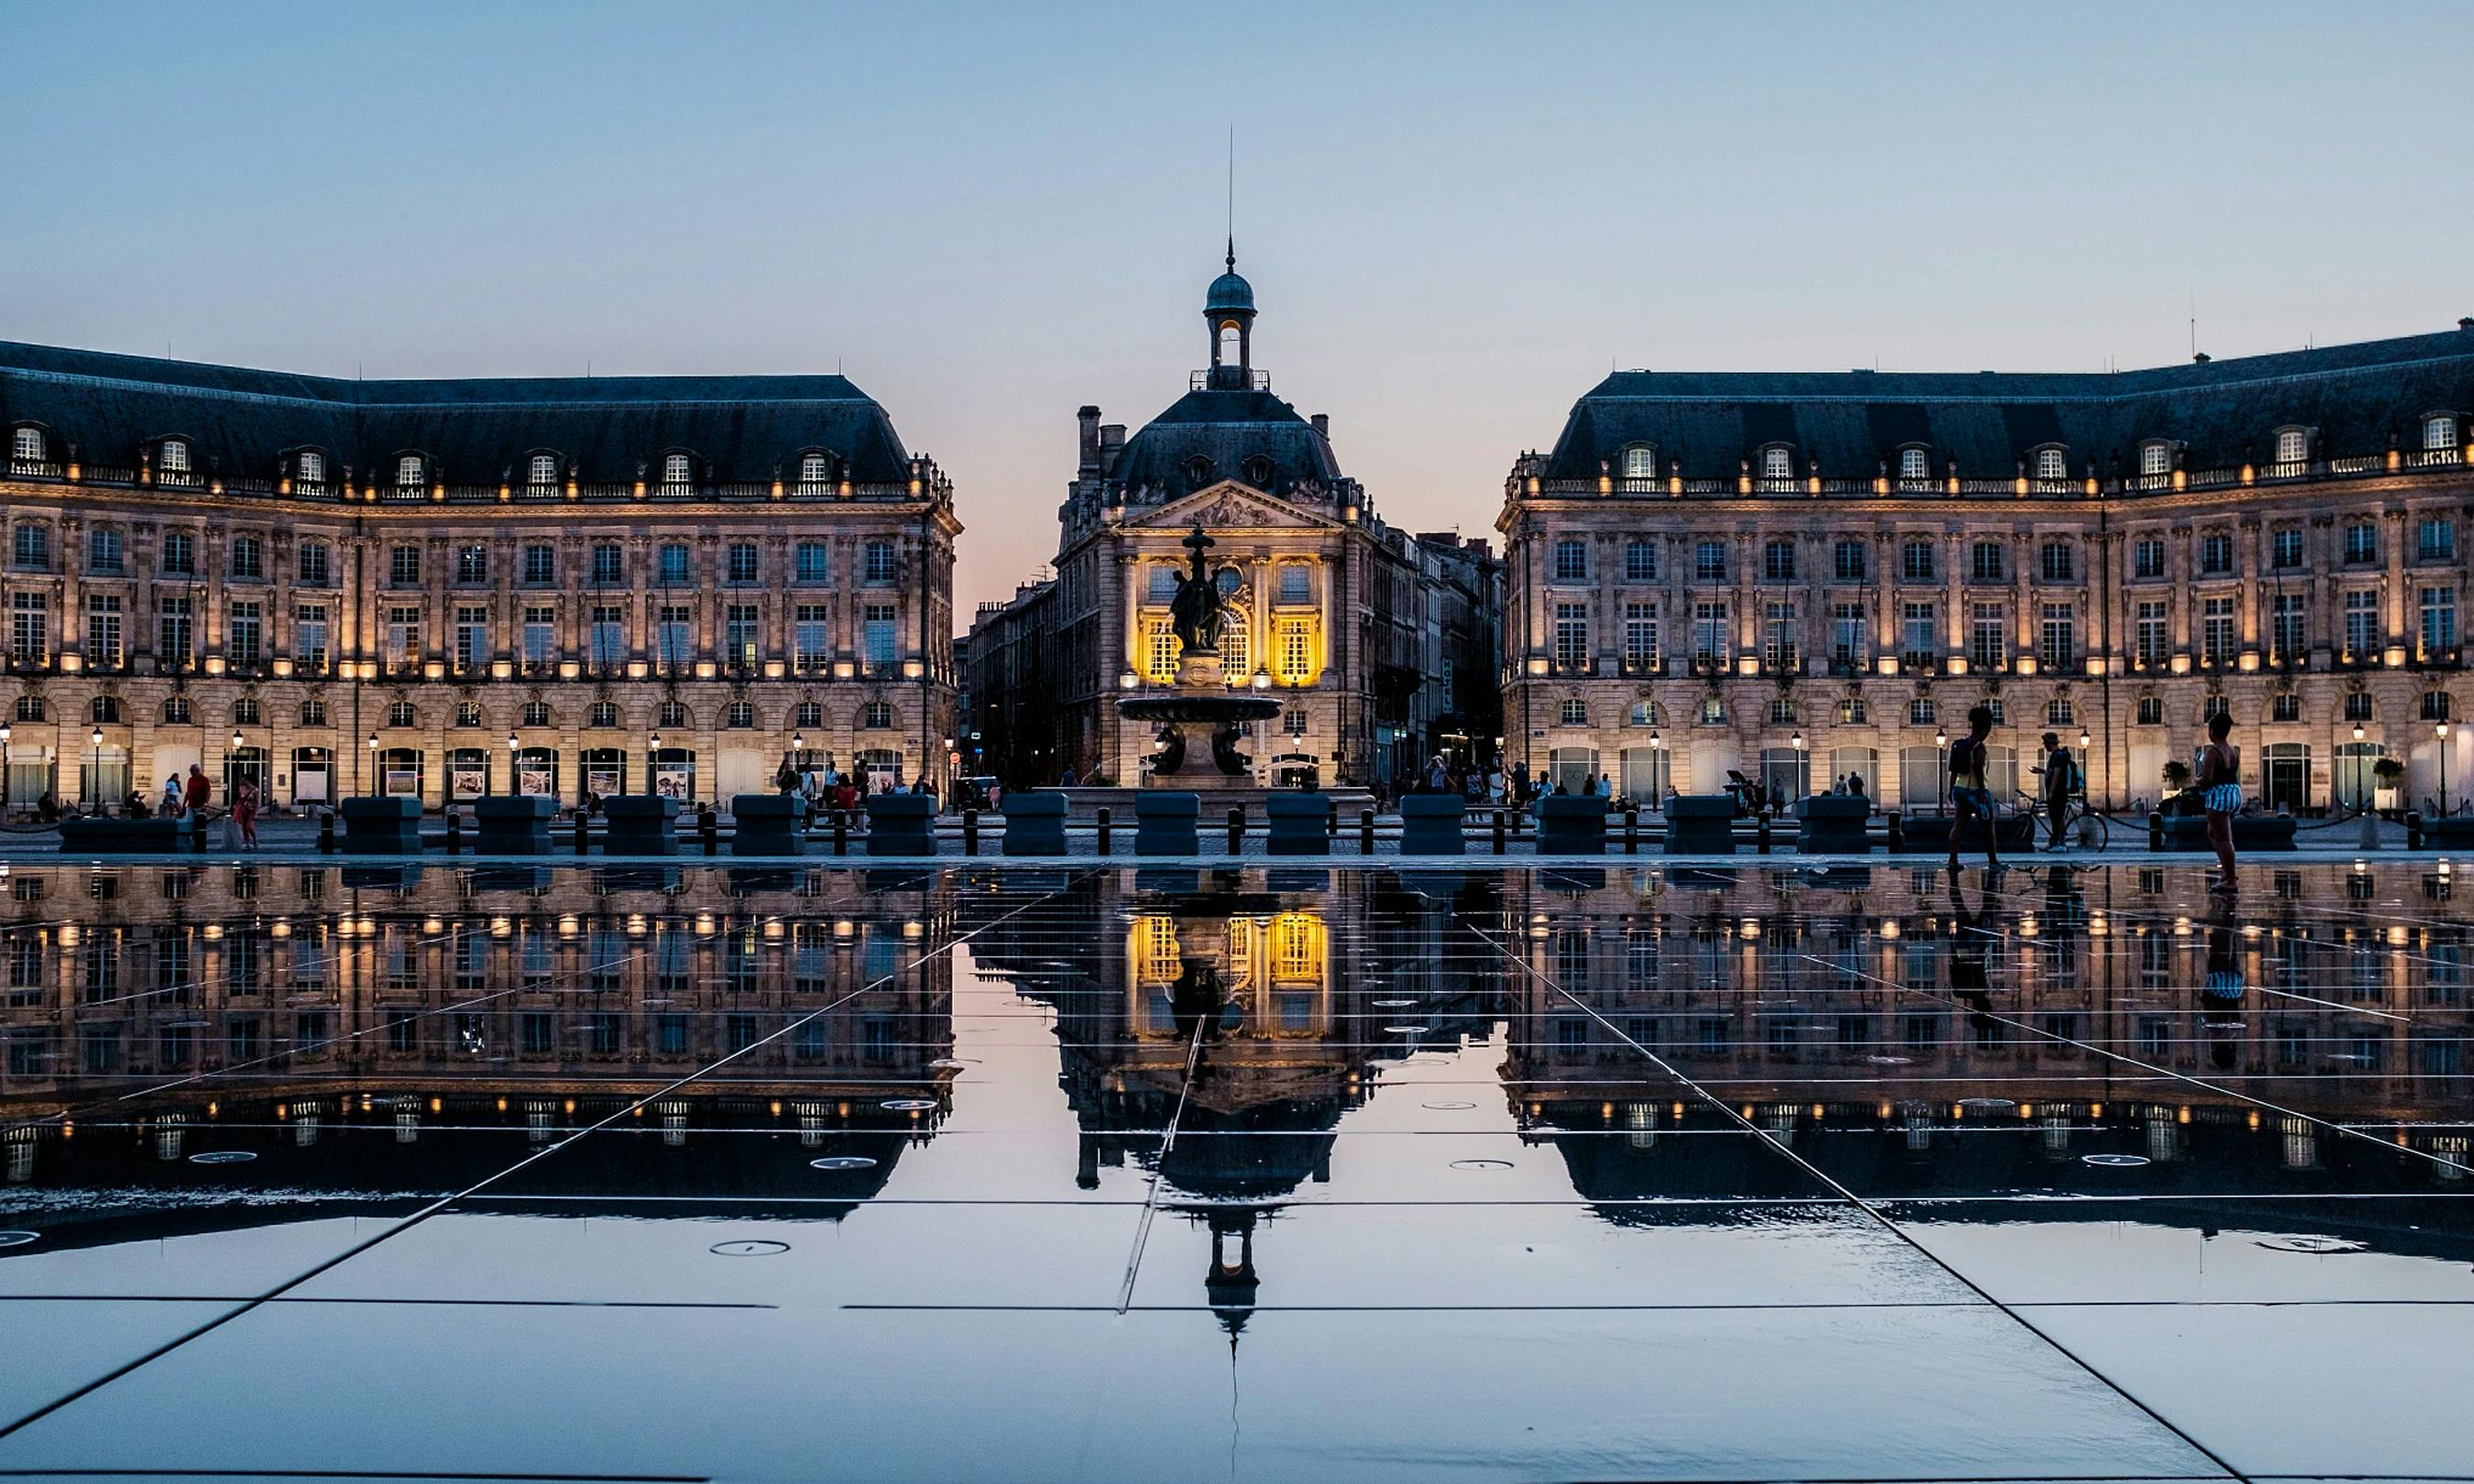 One of the most majestic places in Bordeaux